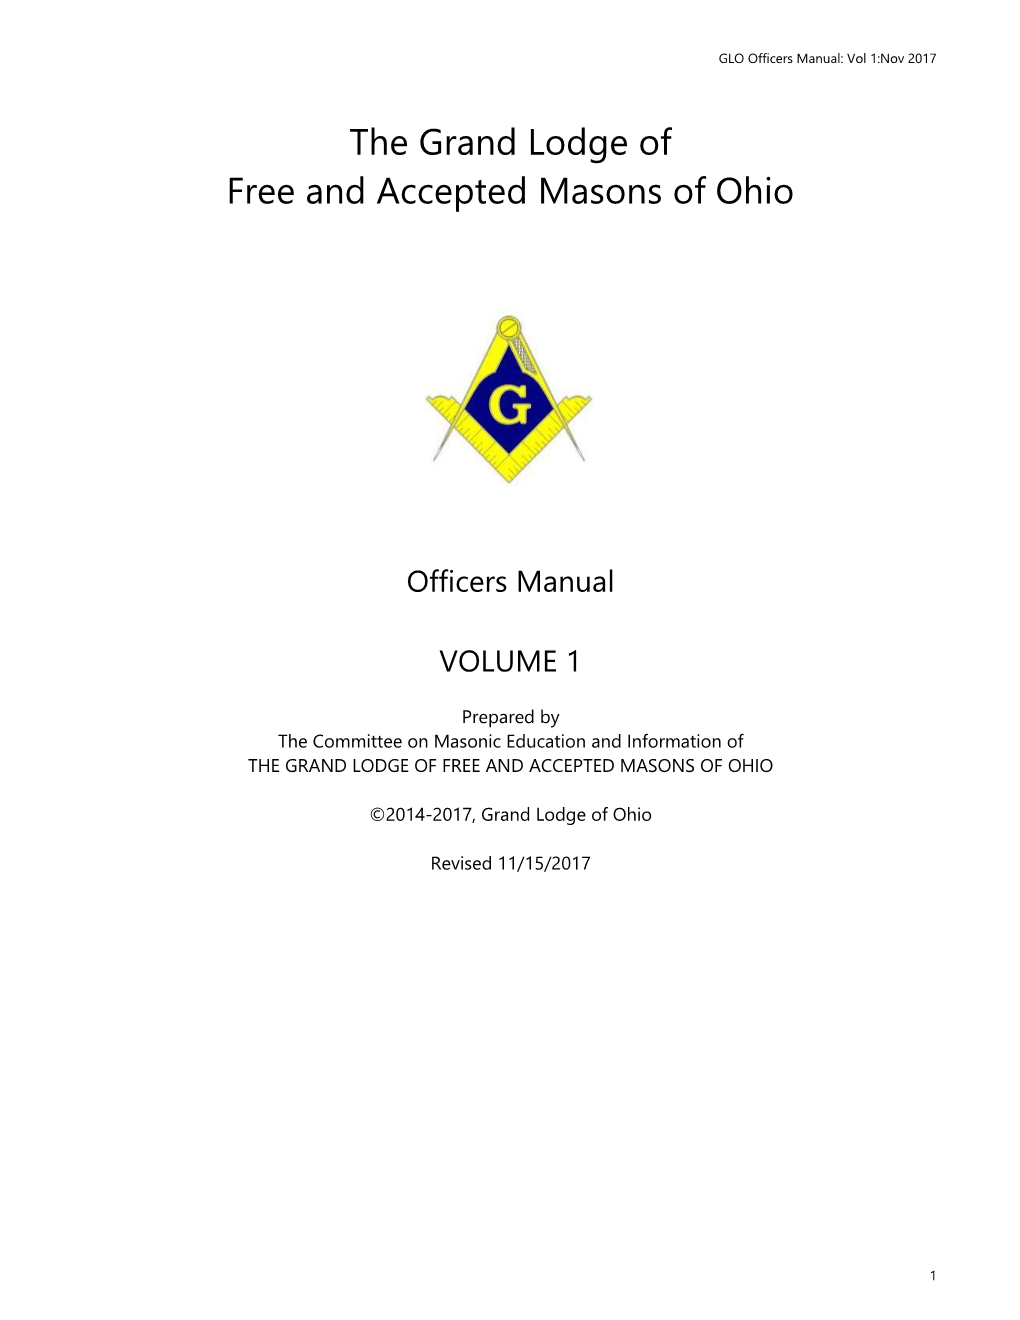 Officers Manual Volume 1 Are Listed Below